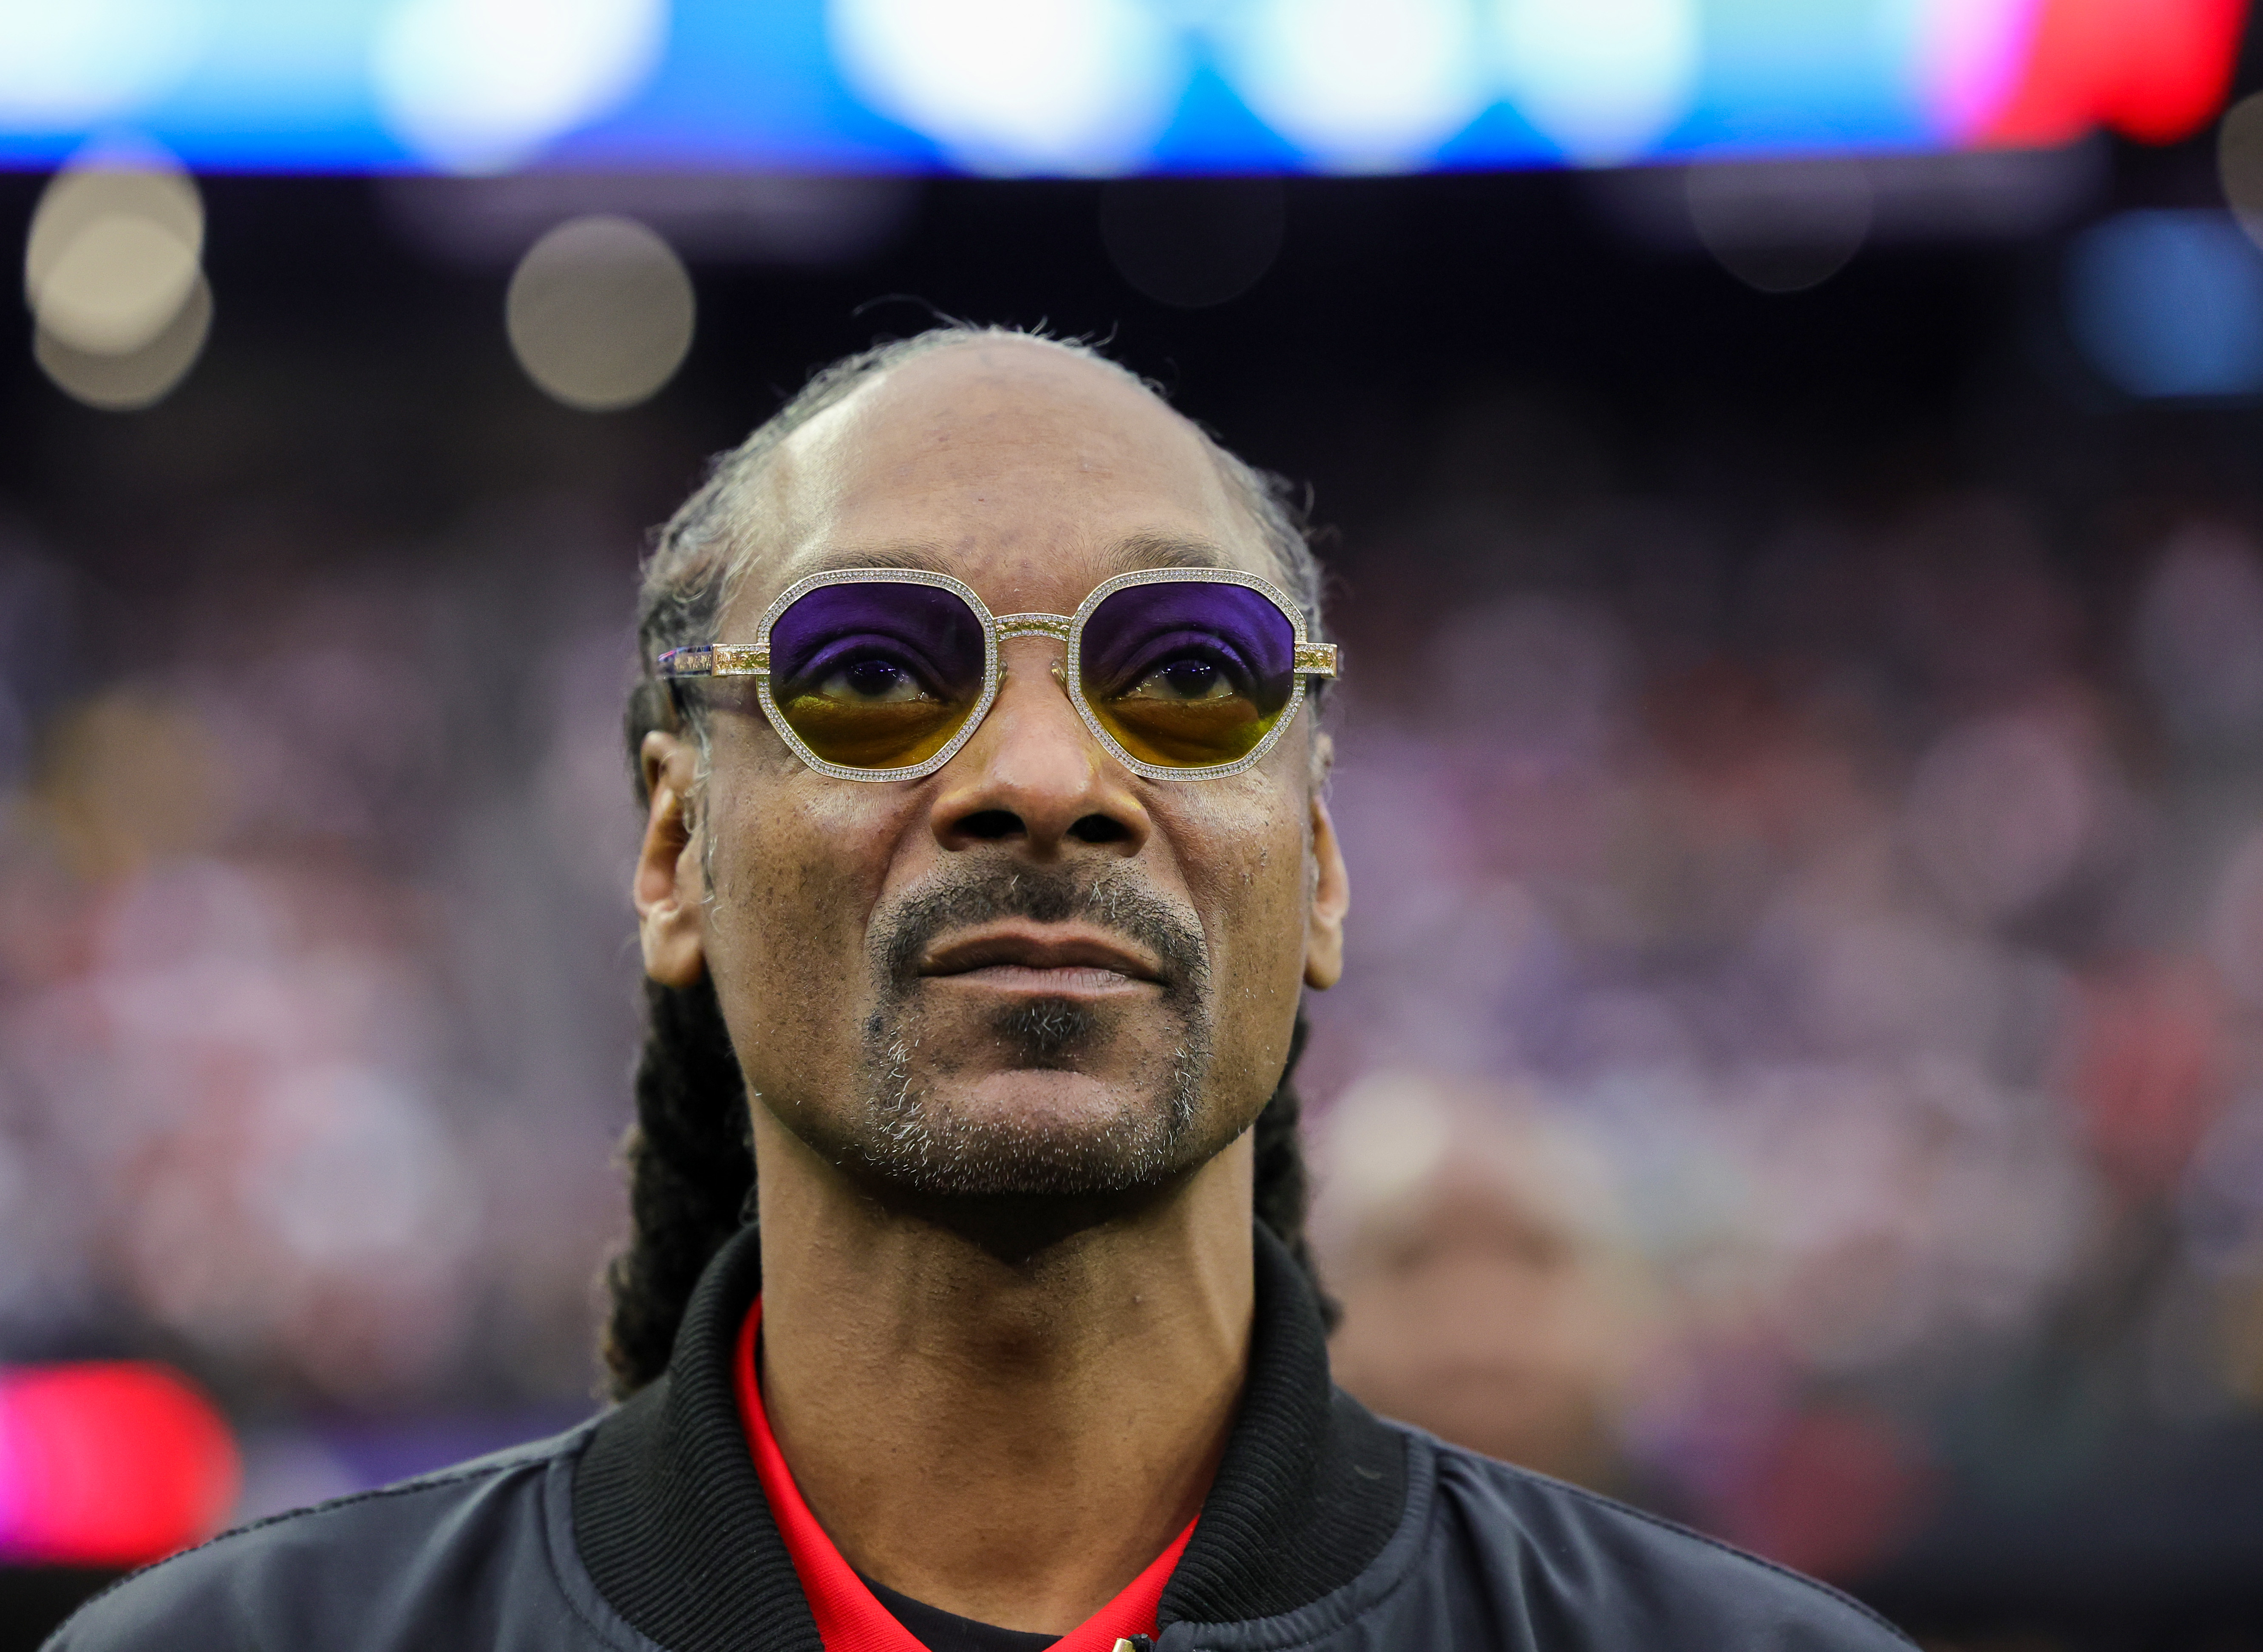 Snoop Dogg (yes, really) is sponsoring the Arizona Bowl in coolest partnership we’ve ever seen